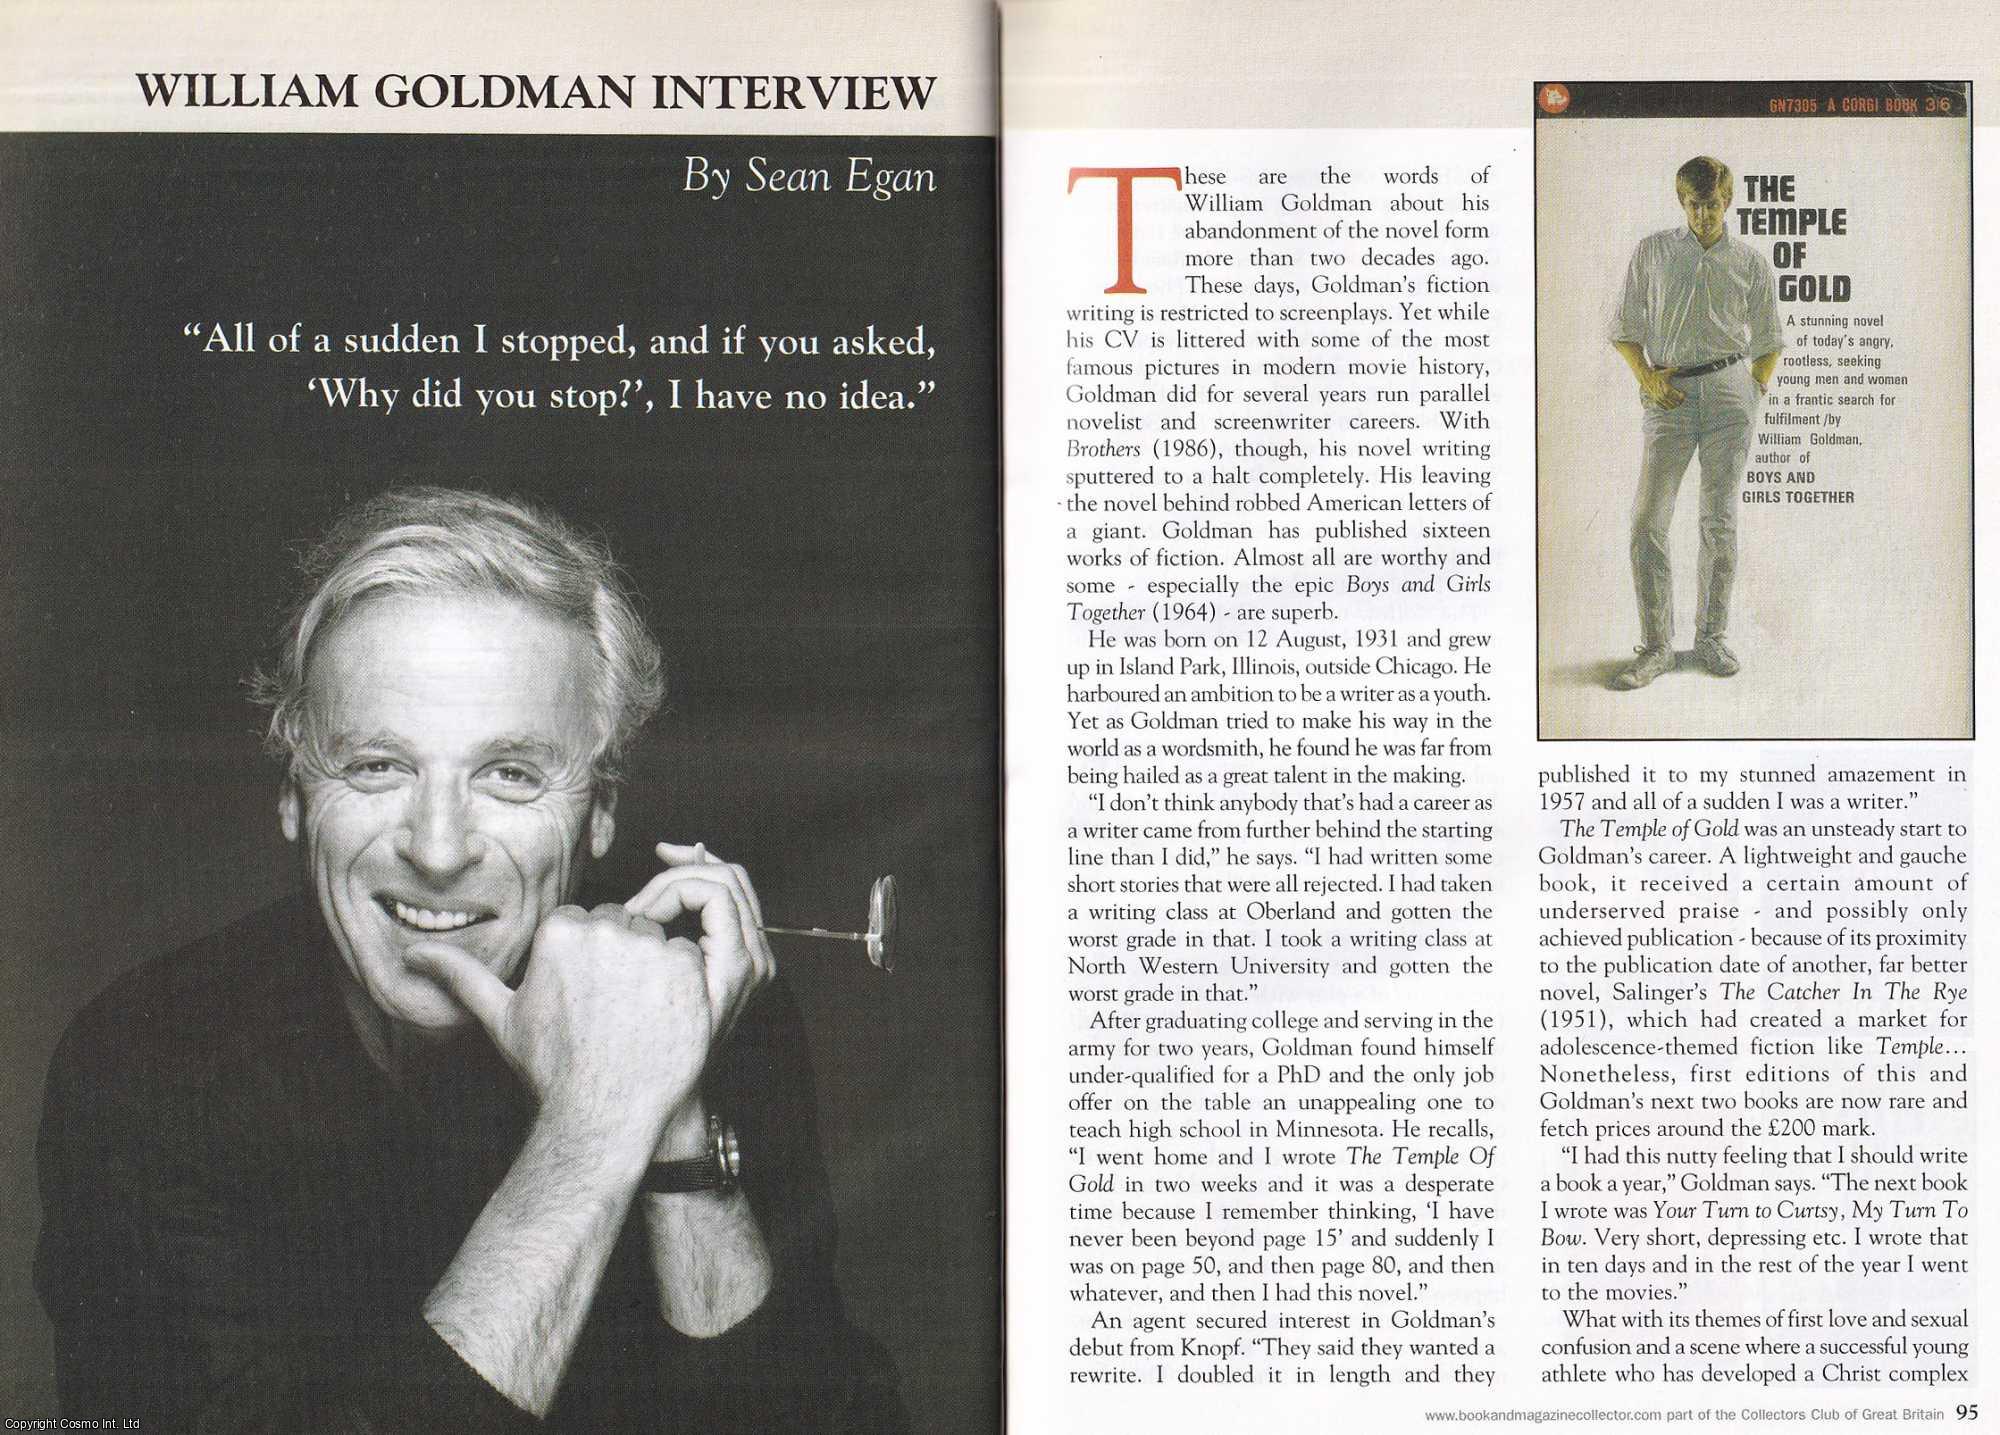 Sean Egan - An Interview with William Goldman (novelist). This is an original article separated from an issue of The Book & Magazine Collector publication.